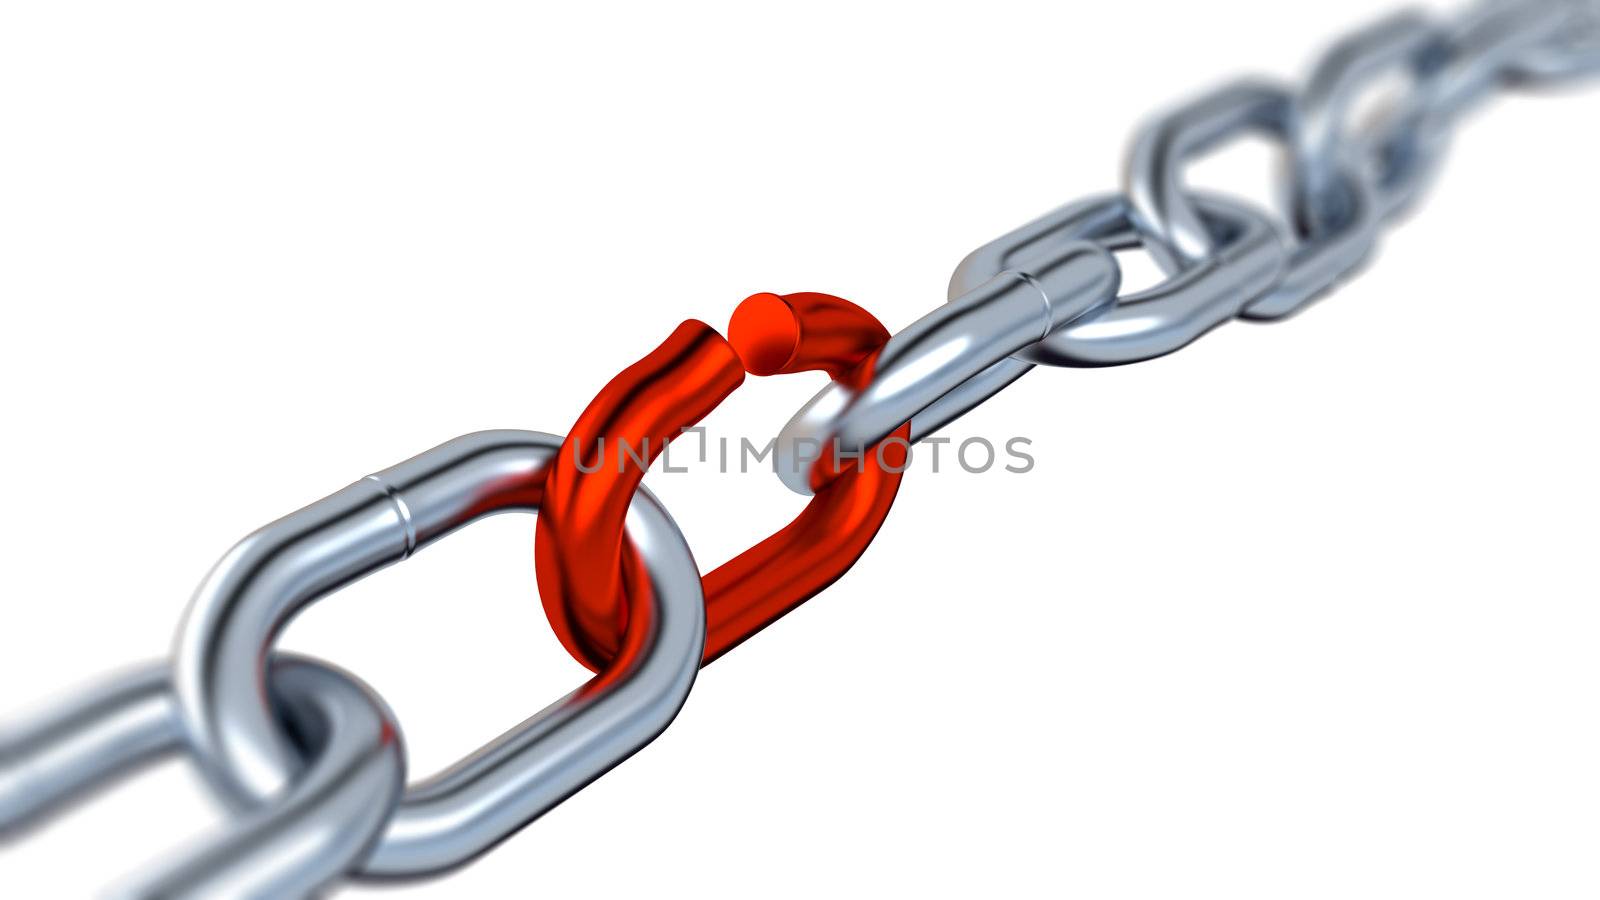 Blurred Metallic Chain with One Red Link by shkyo30